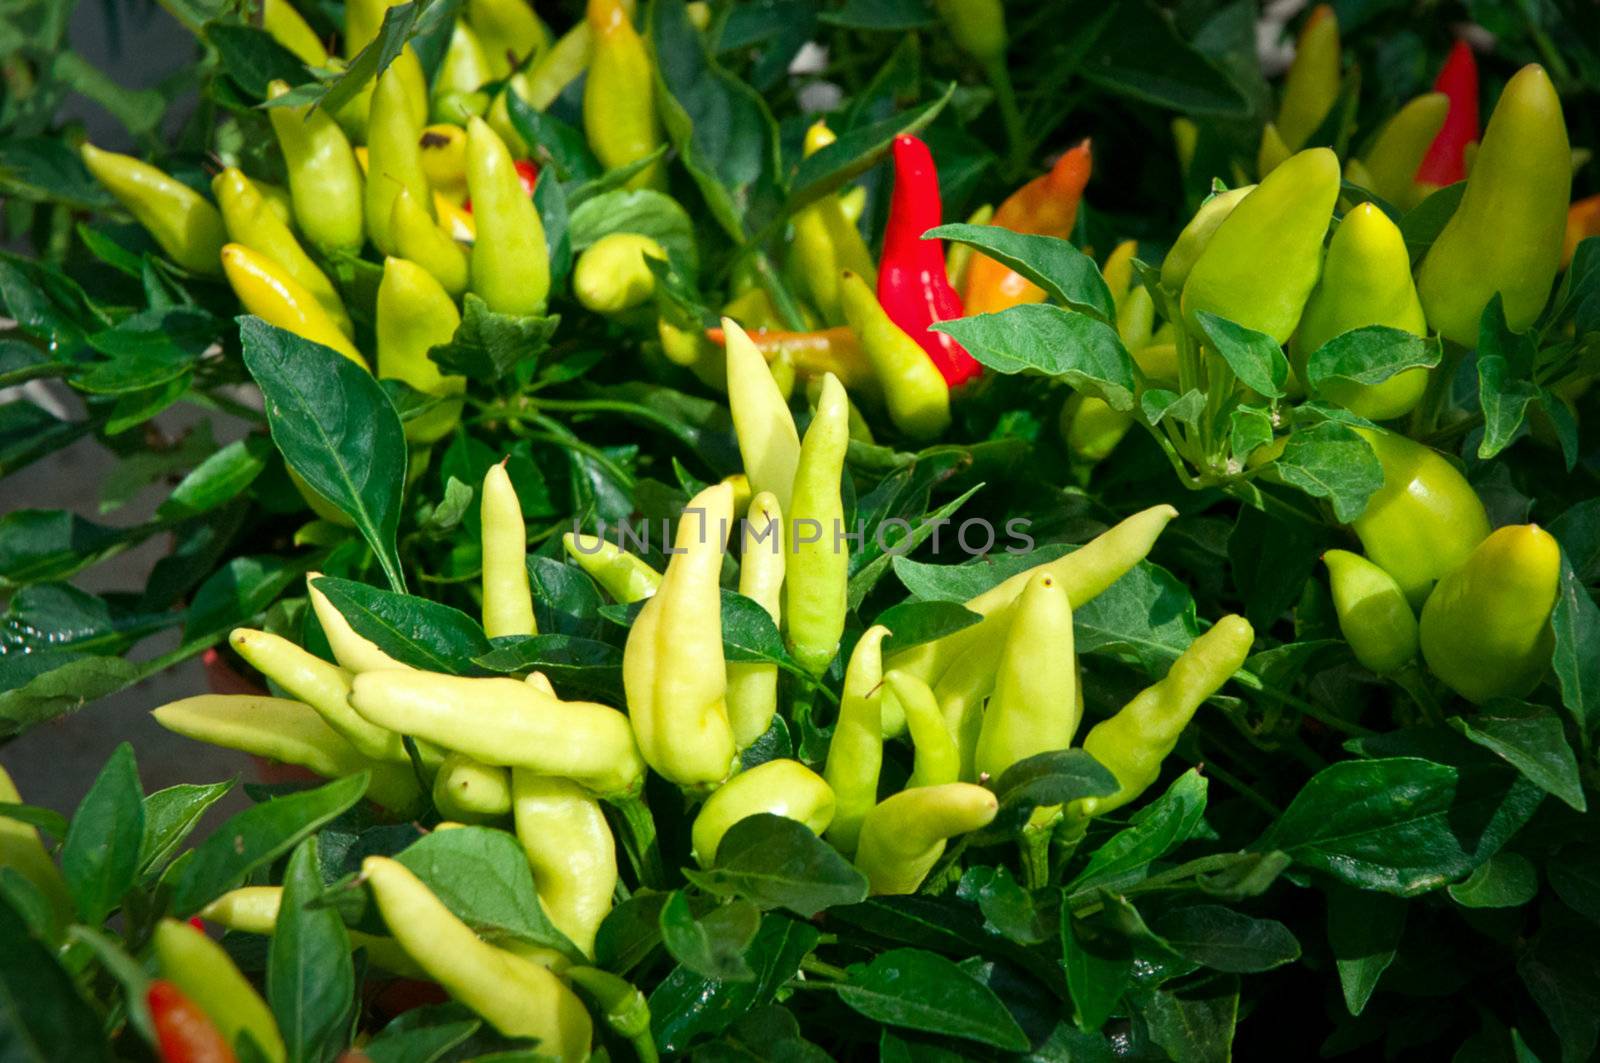 Red and yellow chili pepper growing on a plant . by LarisaP